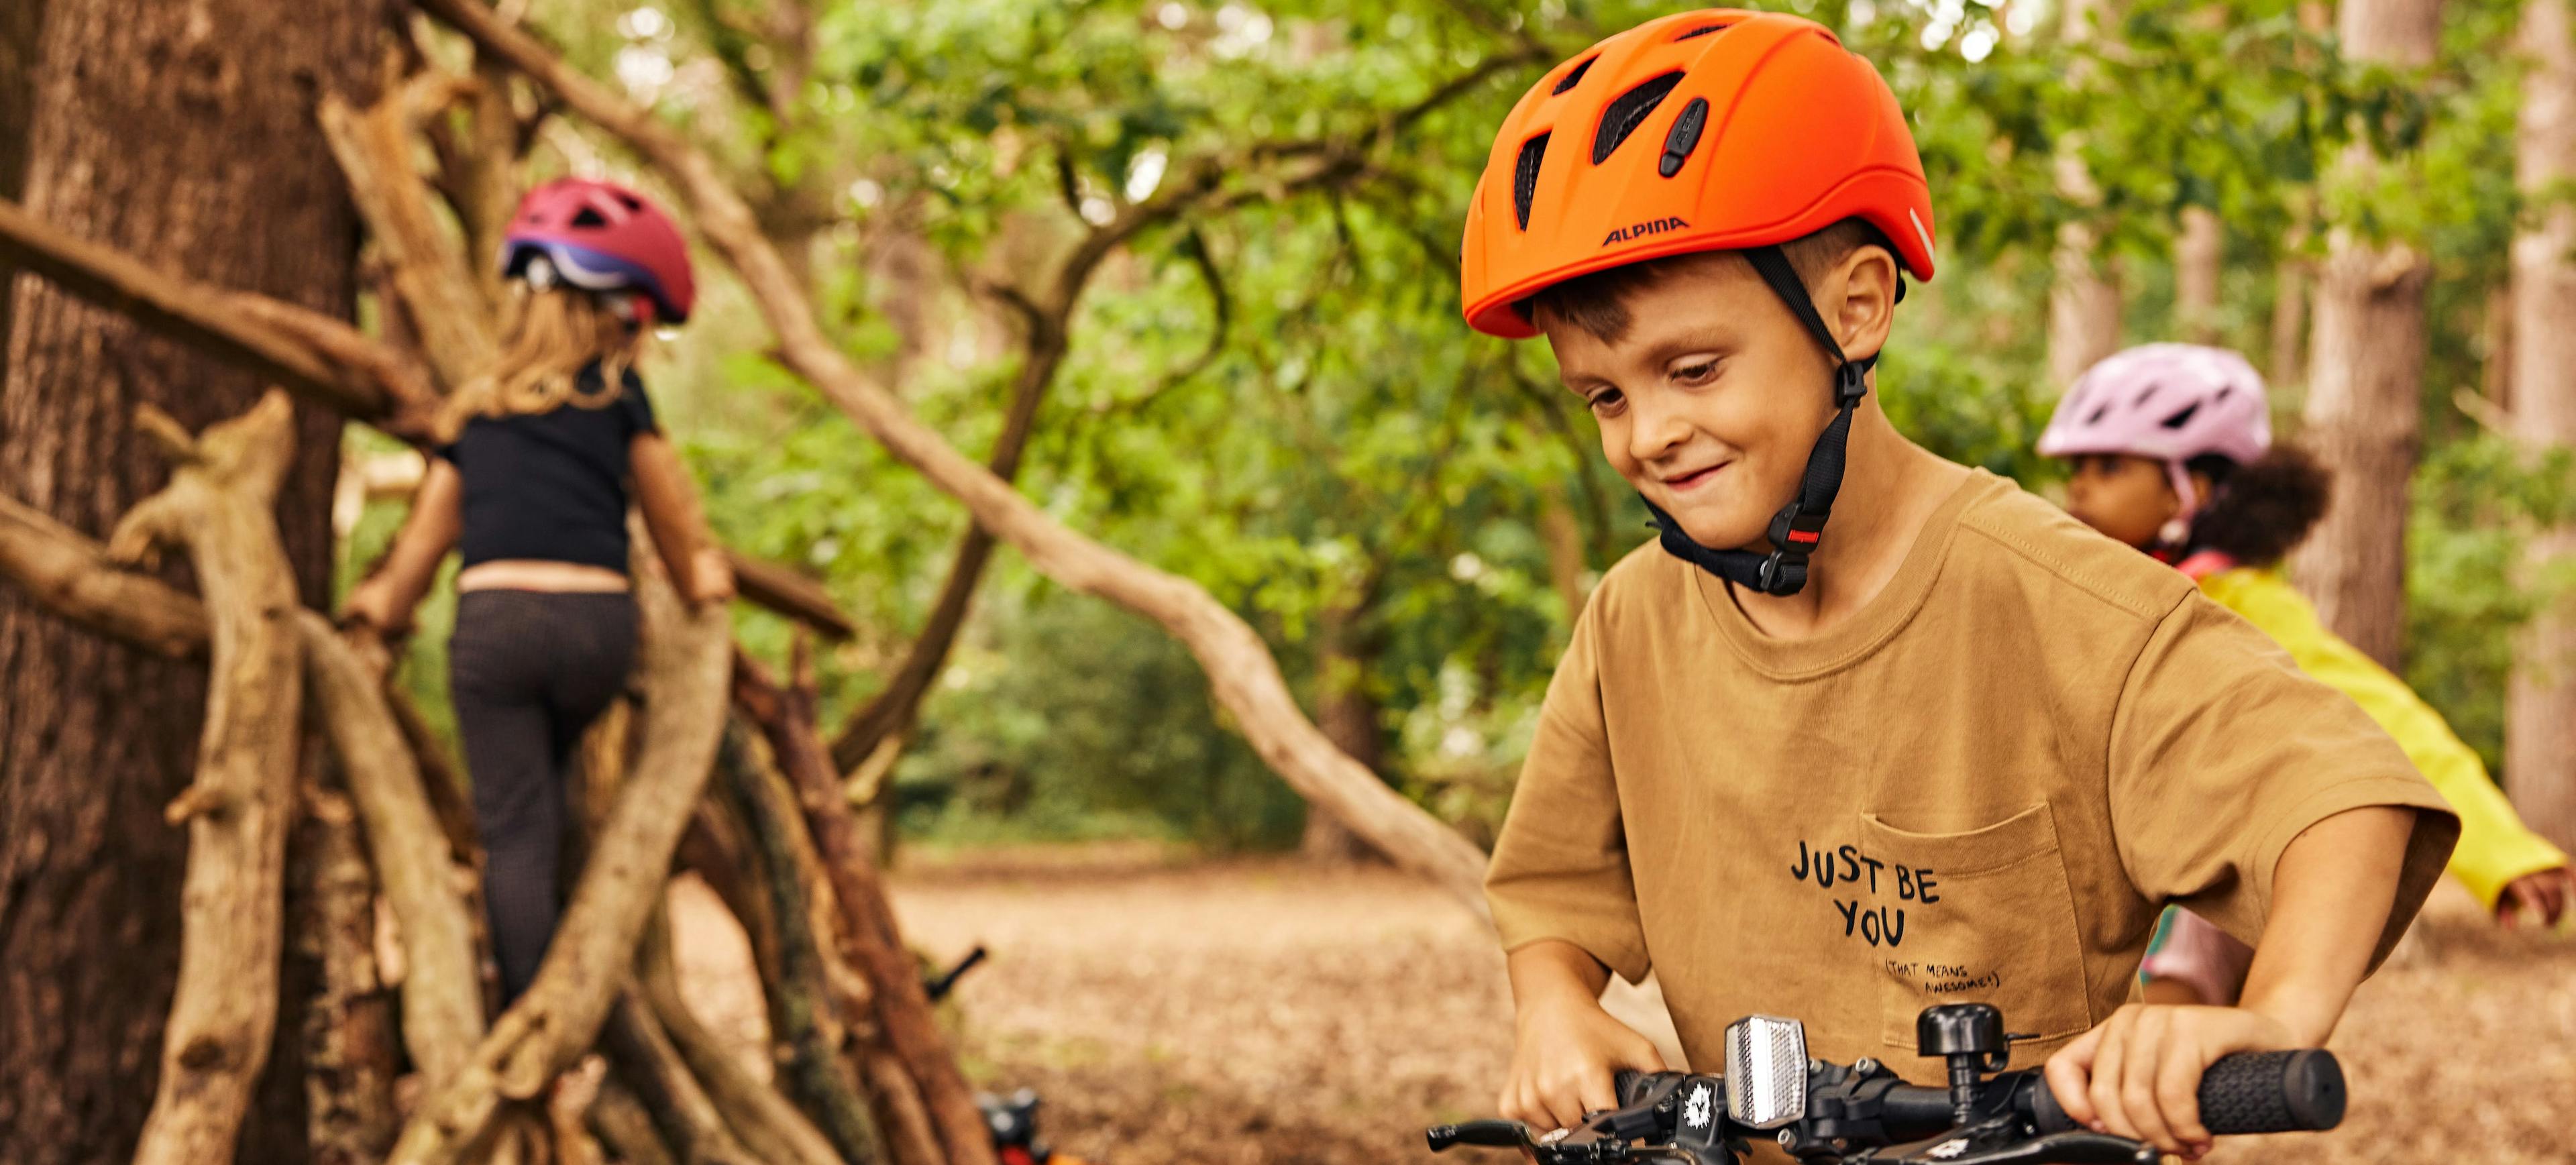 Cycling Safety Gear collection header image